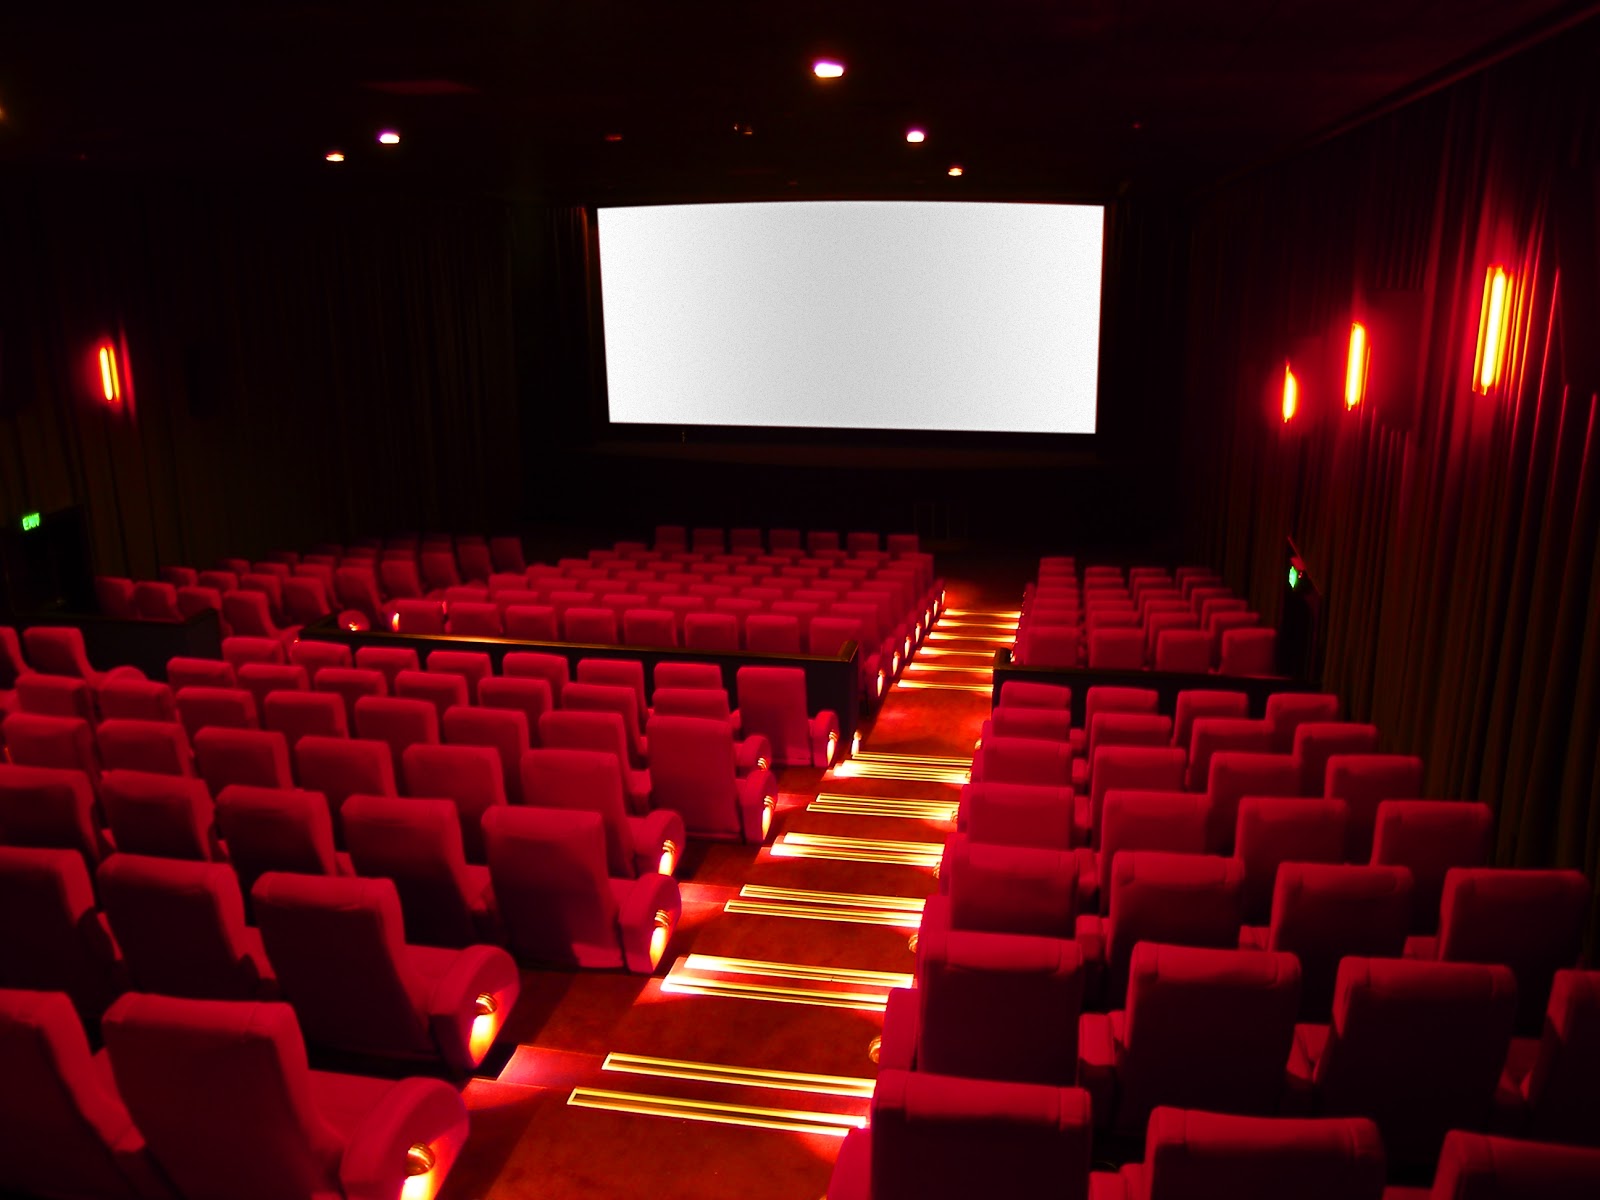 Working in a cinema